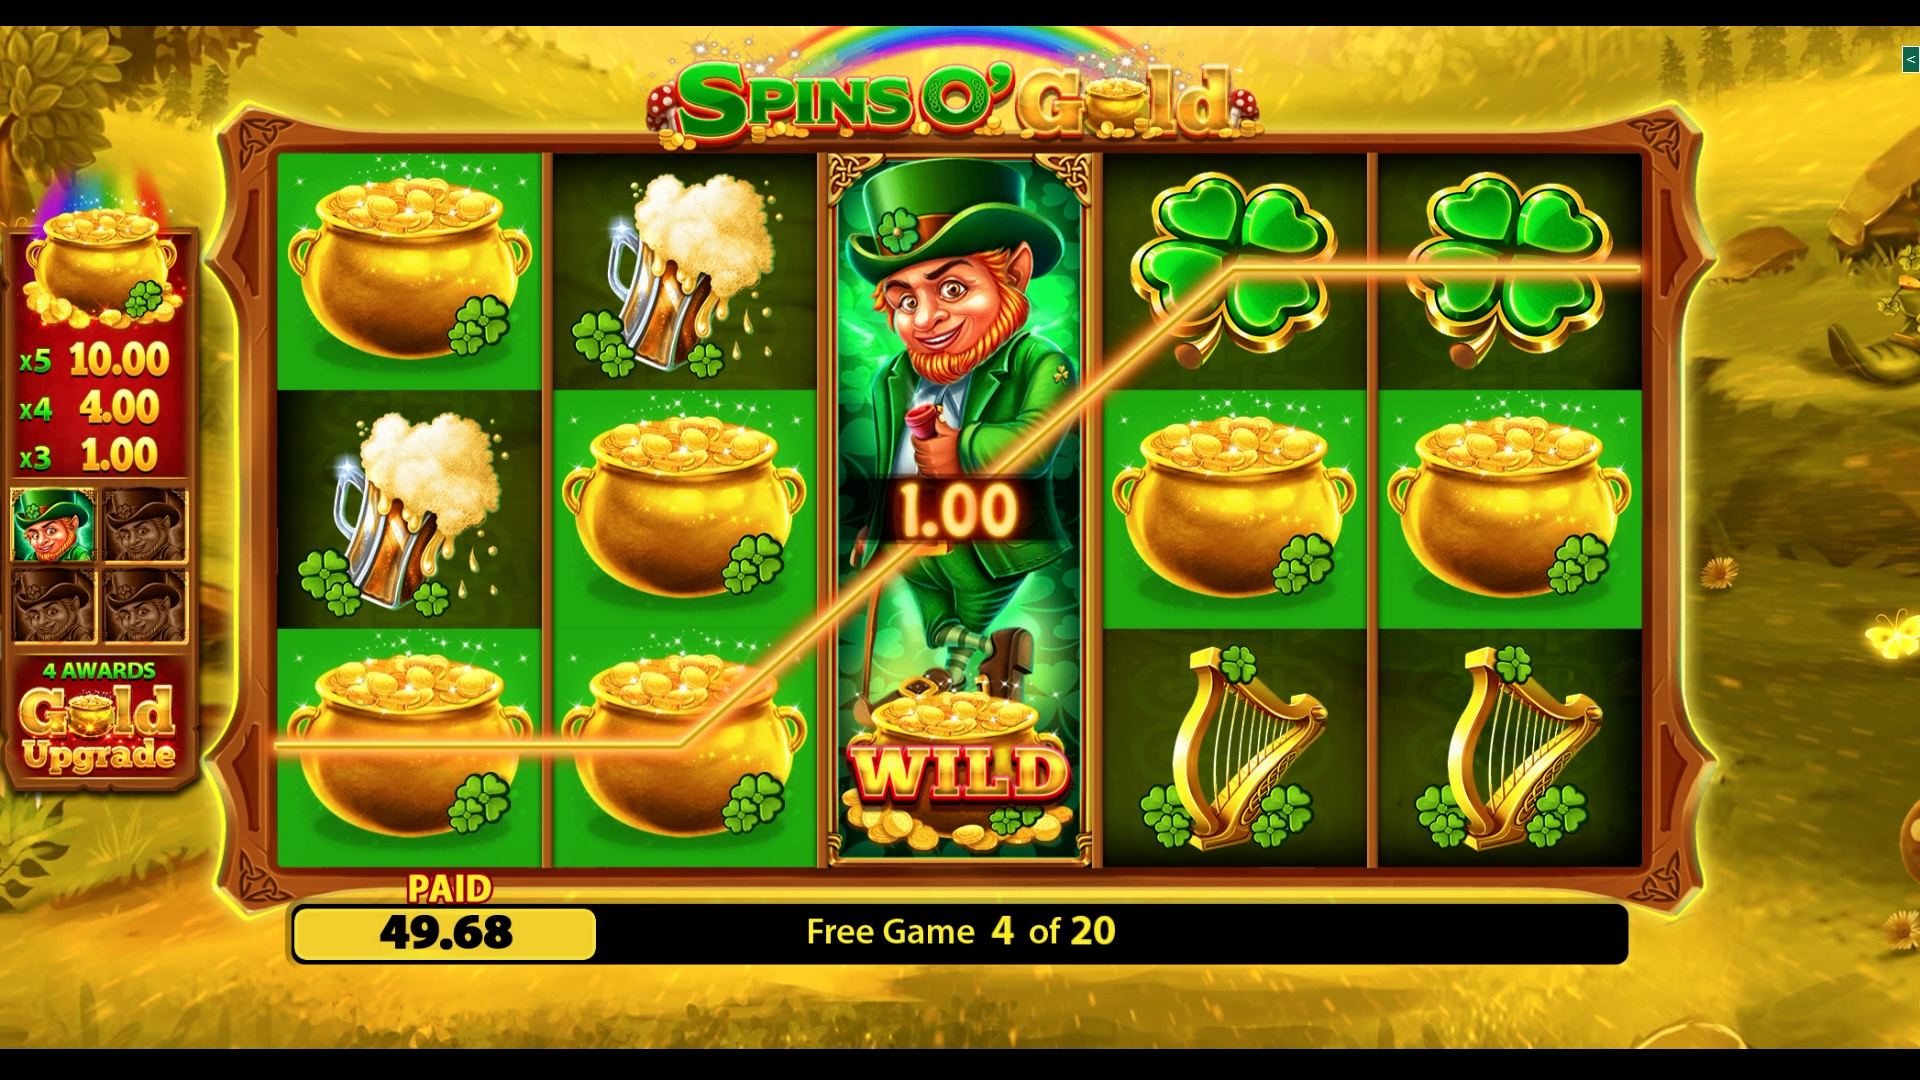 SPINS O’ GOLD FORTUNE PLAY